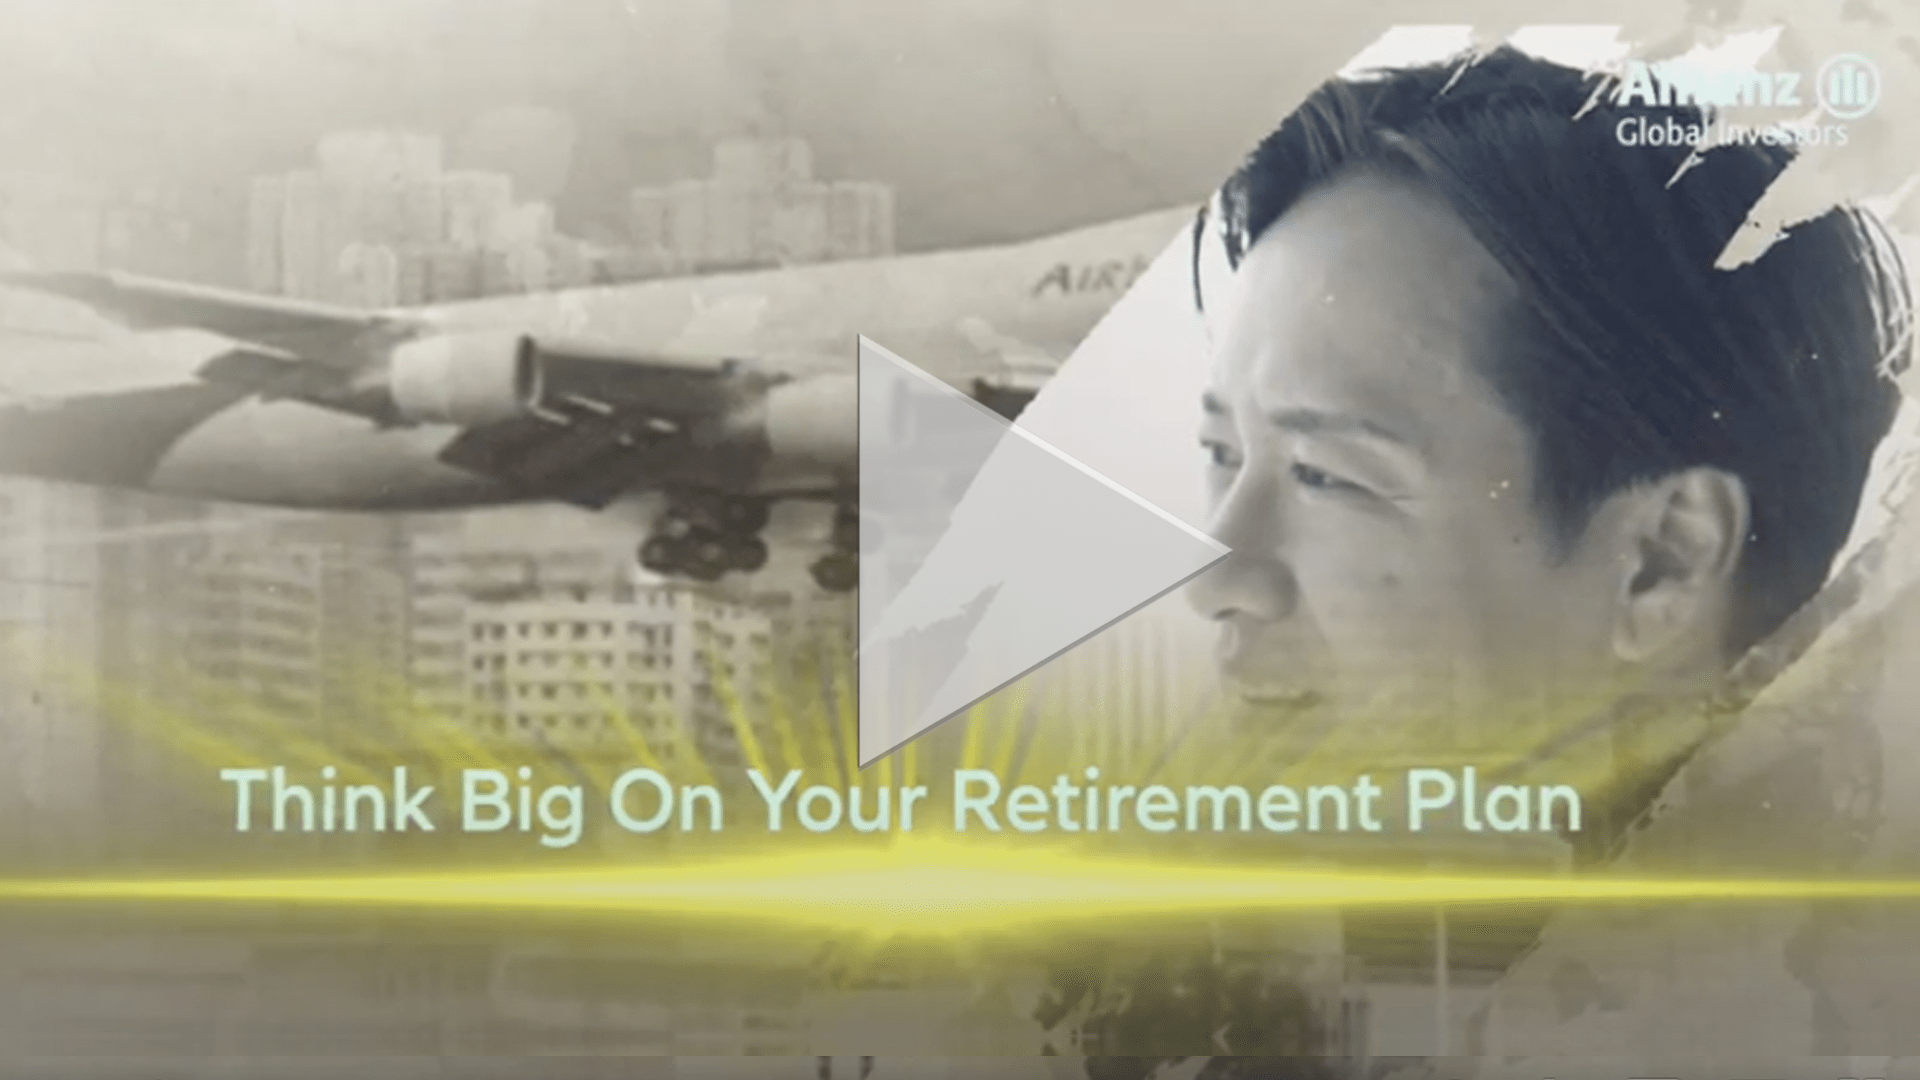 Think big on your retirement